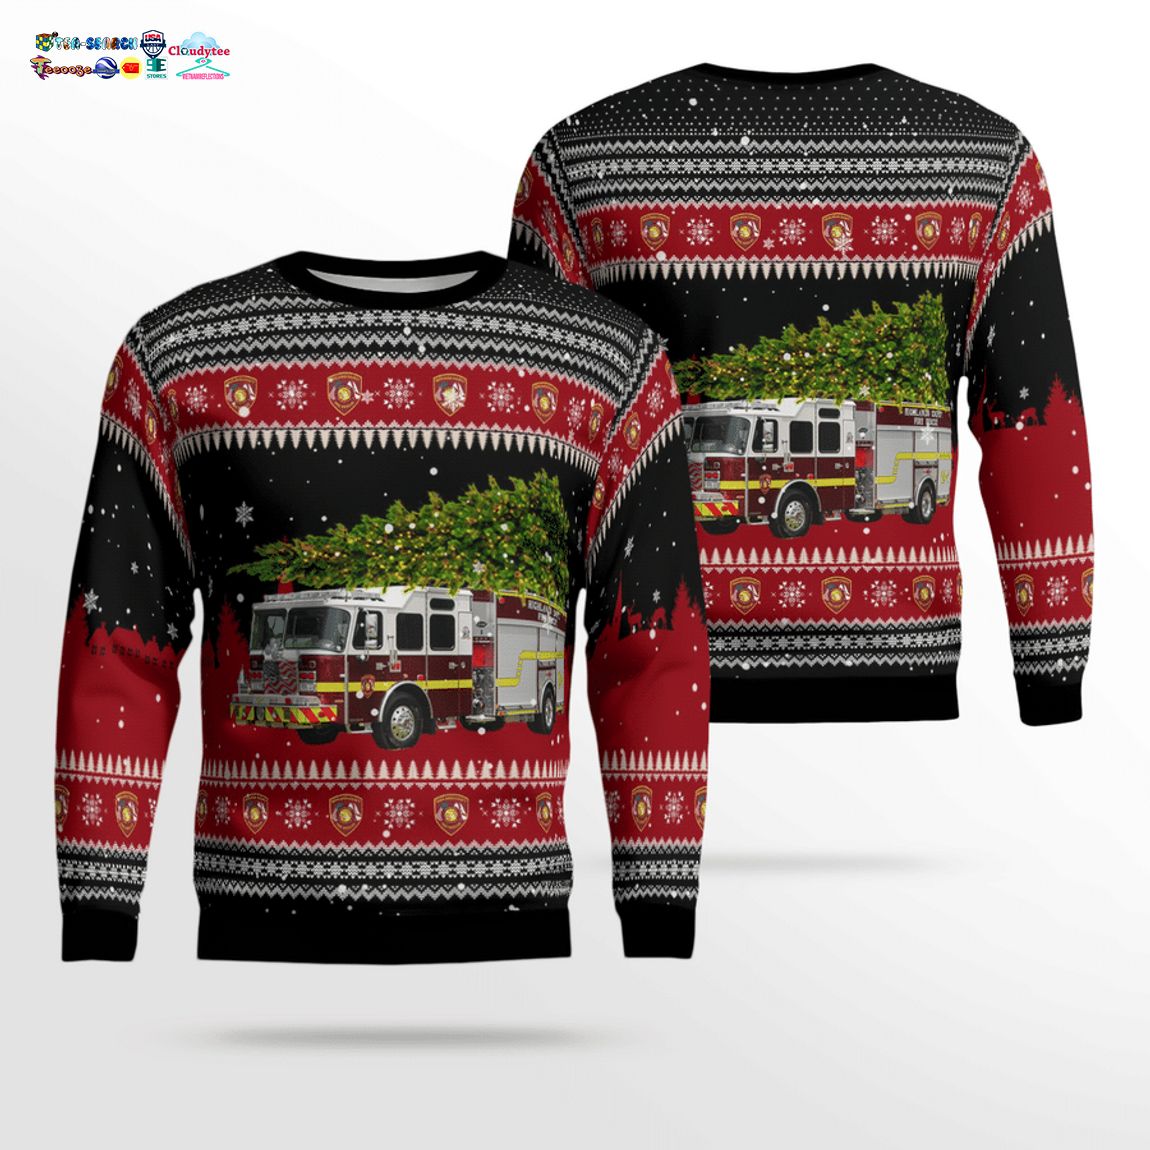 Florida Highlands County Fire Rescue 3D Christmas Sweater - Out of the world